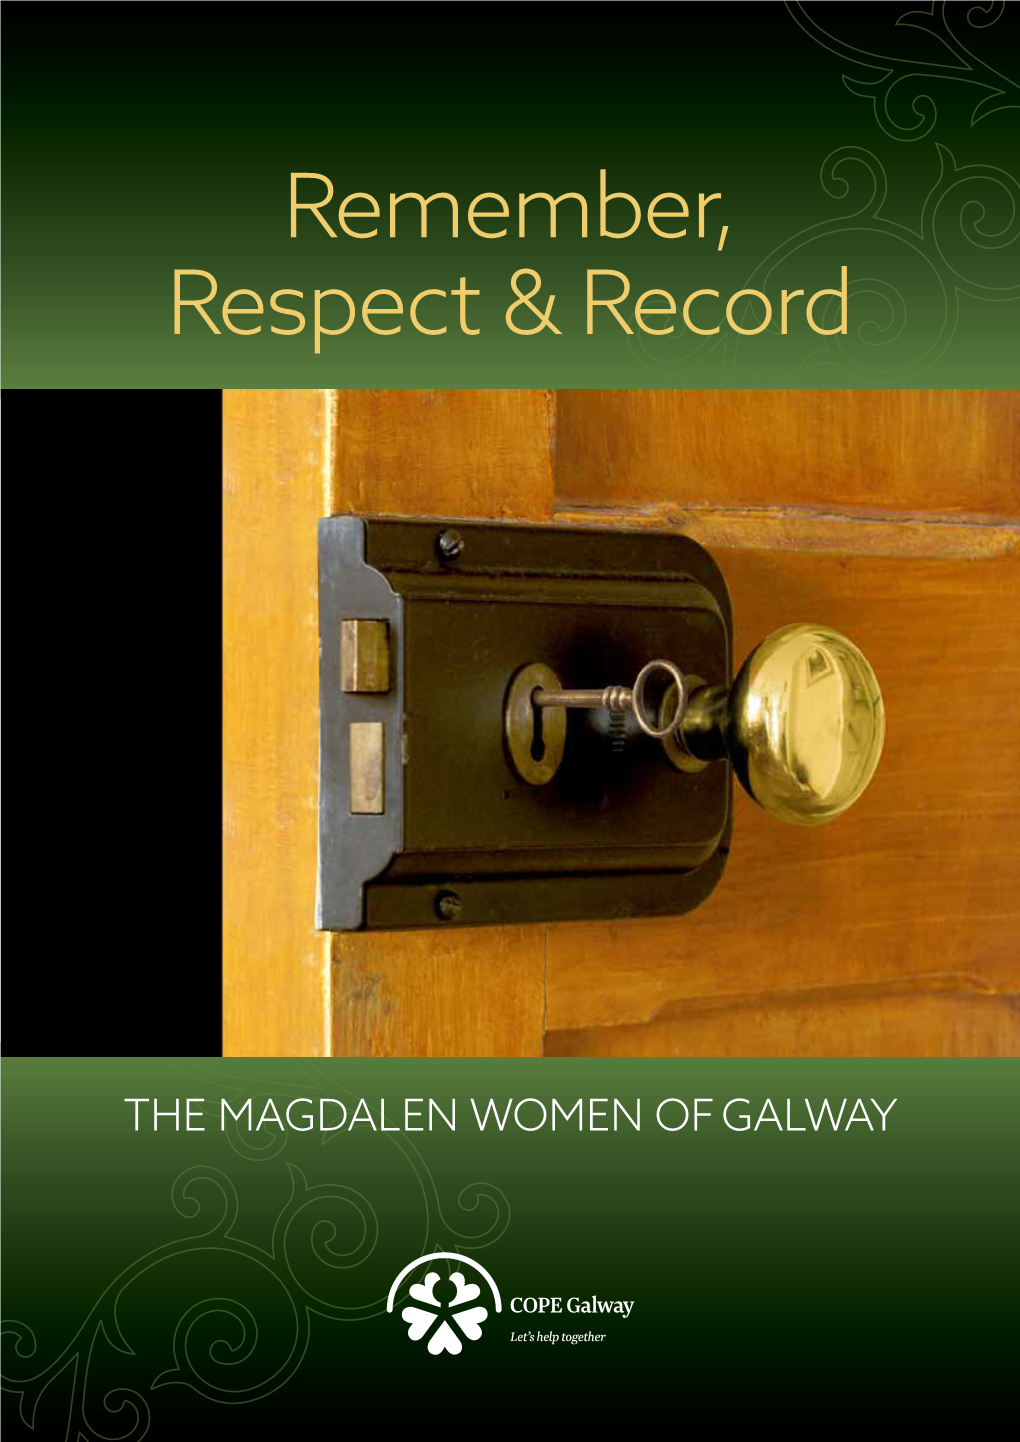 Remember Respect & Record – the Magdalen Women of Galway